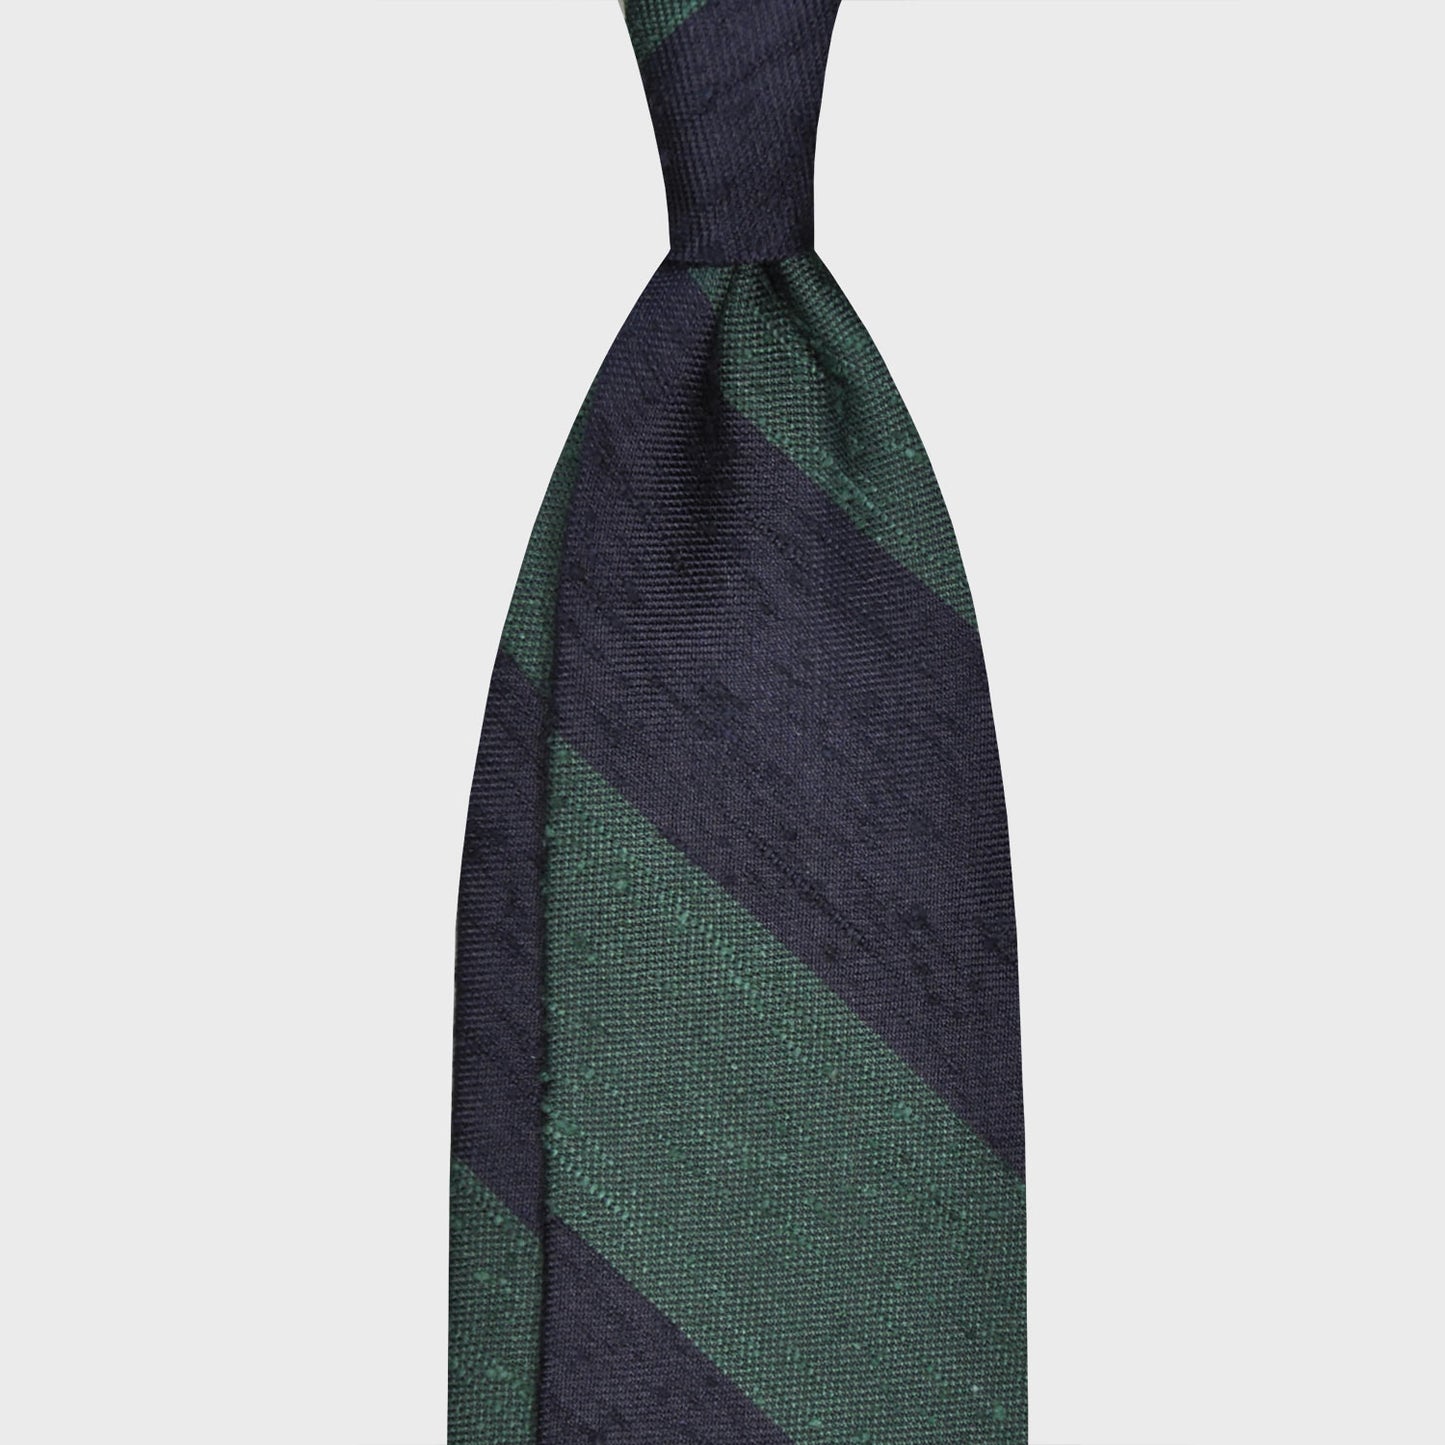 Green Shantung Silk Tie Regimental Wide Striped. Formal shantung tie with wide striped navy blue and pine green, ideal for refined outfits four seasons, handmade in Italy by F.Marino exclusive for Wools Boutique Uomo, unlined tie 3 folds with hand rolled edge.